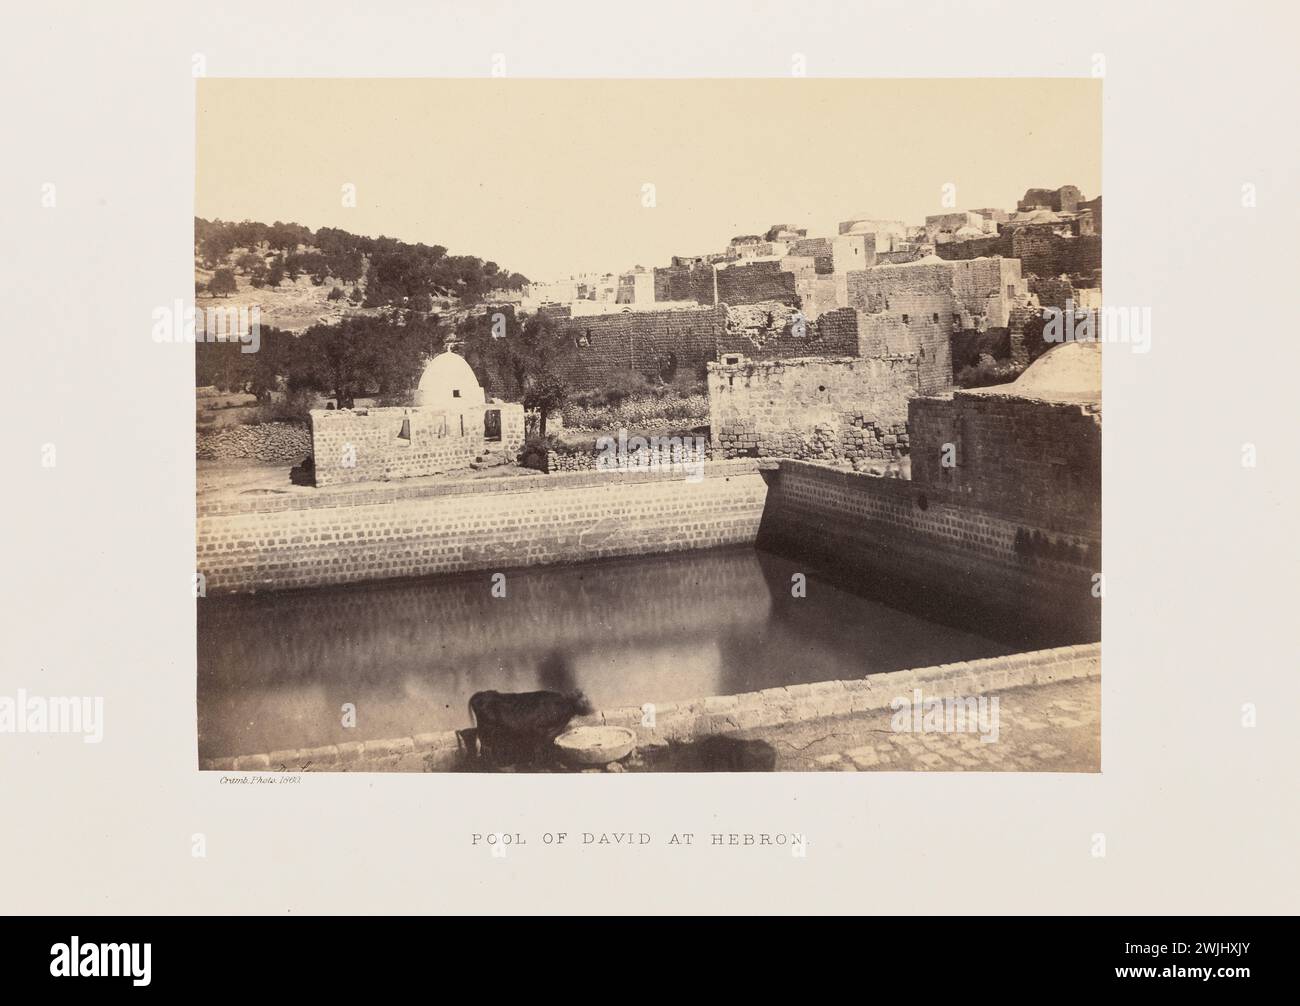 Vintage Palestine photo of the Pool of David at Hebron.          View of King David's Pool, also called the King's Pool, in Hebron, surrounded by the brick walls and buildings of the city. Cattle sip from a trough beside the pool in the foreground. by John Cramb   1860, Stock Photo